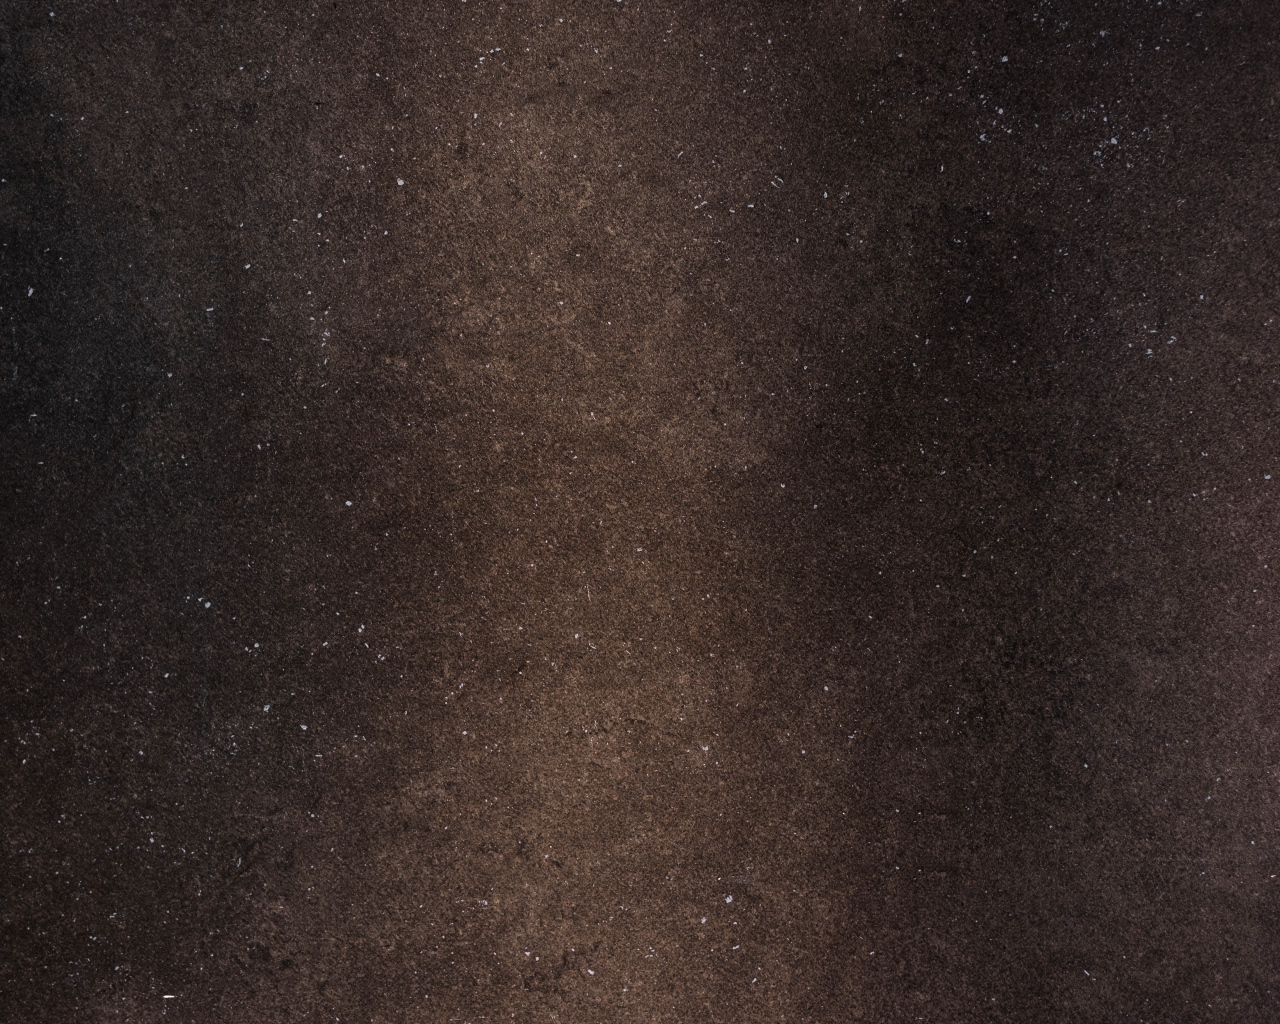 Bronze texture for background